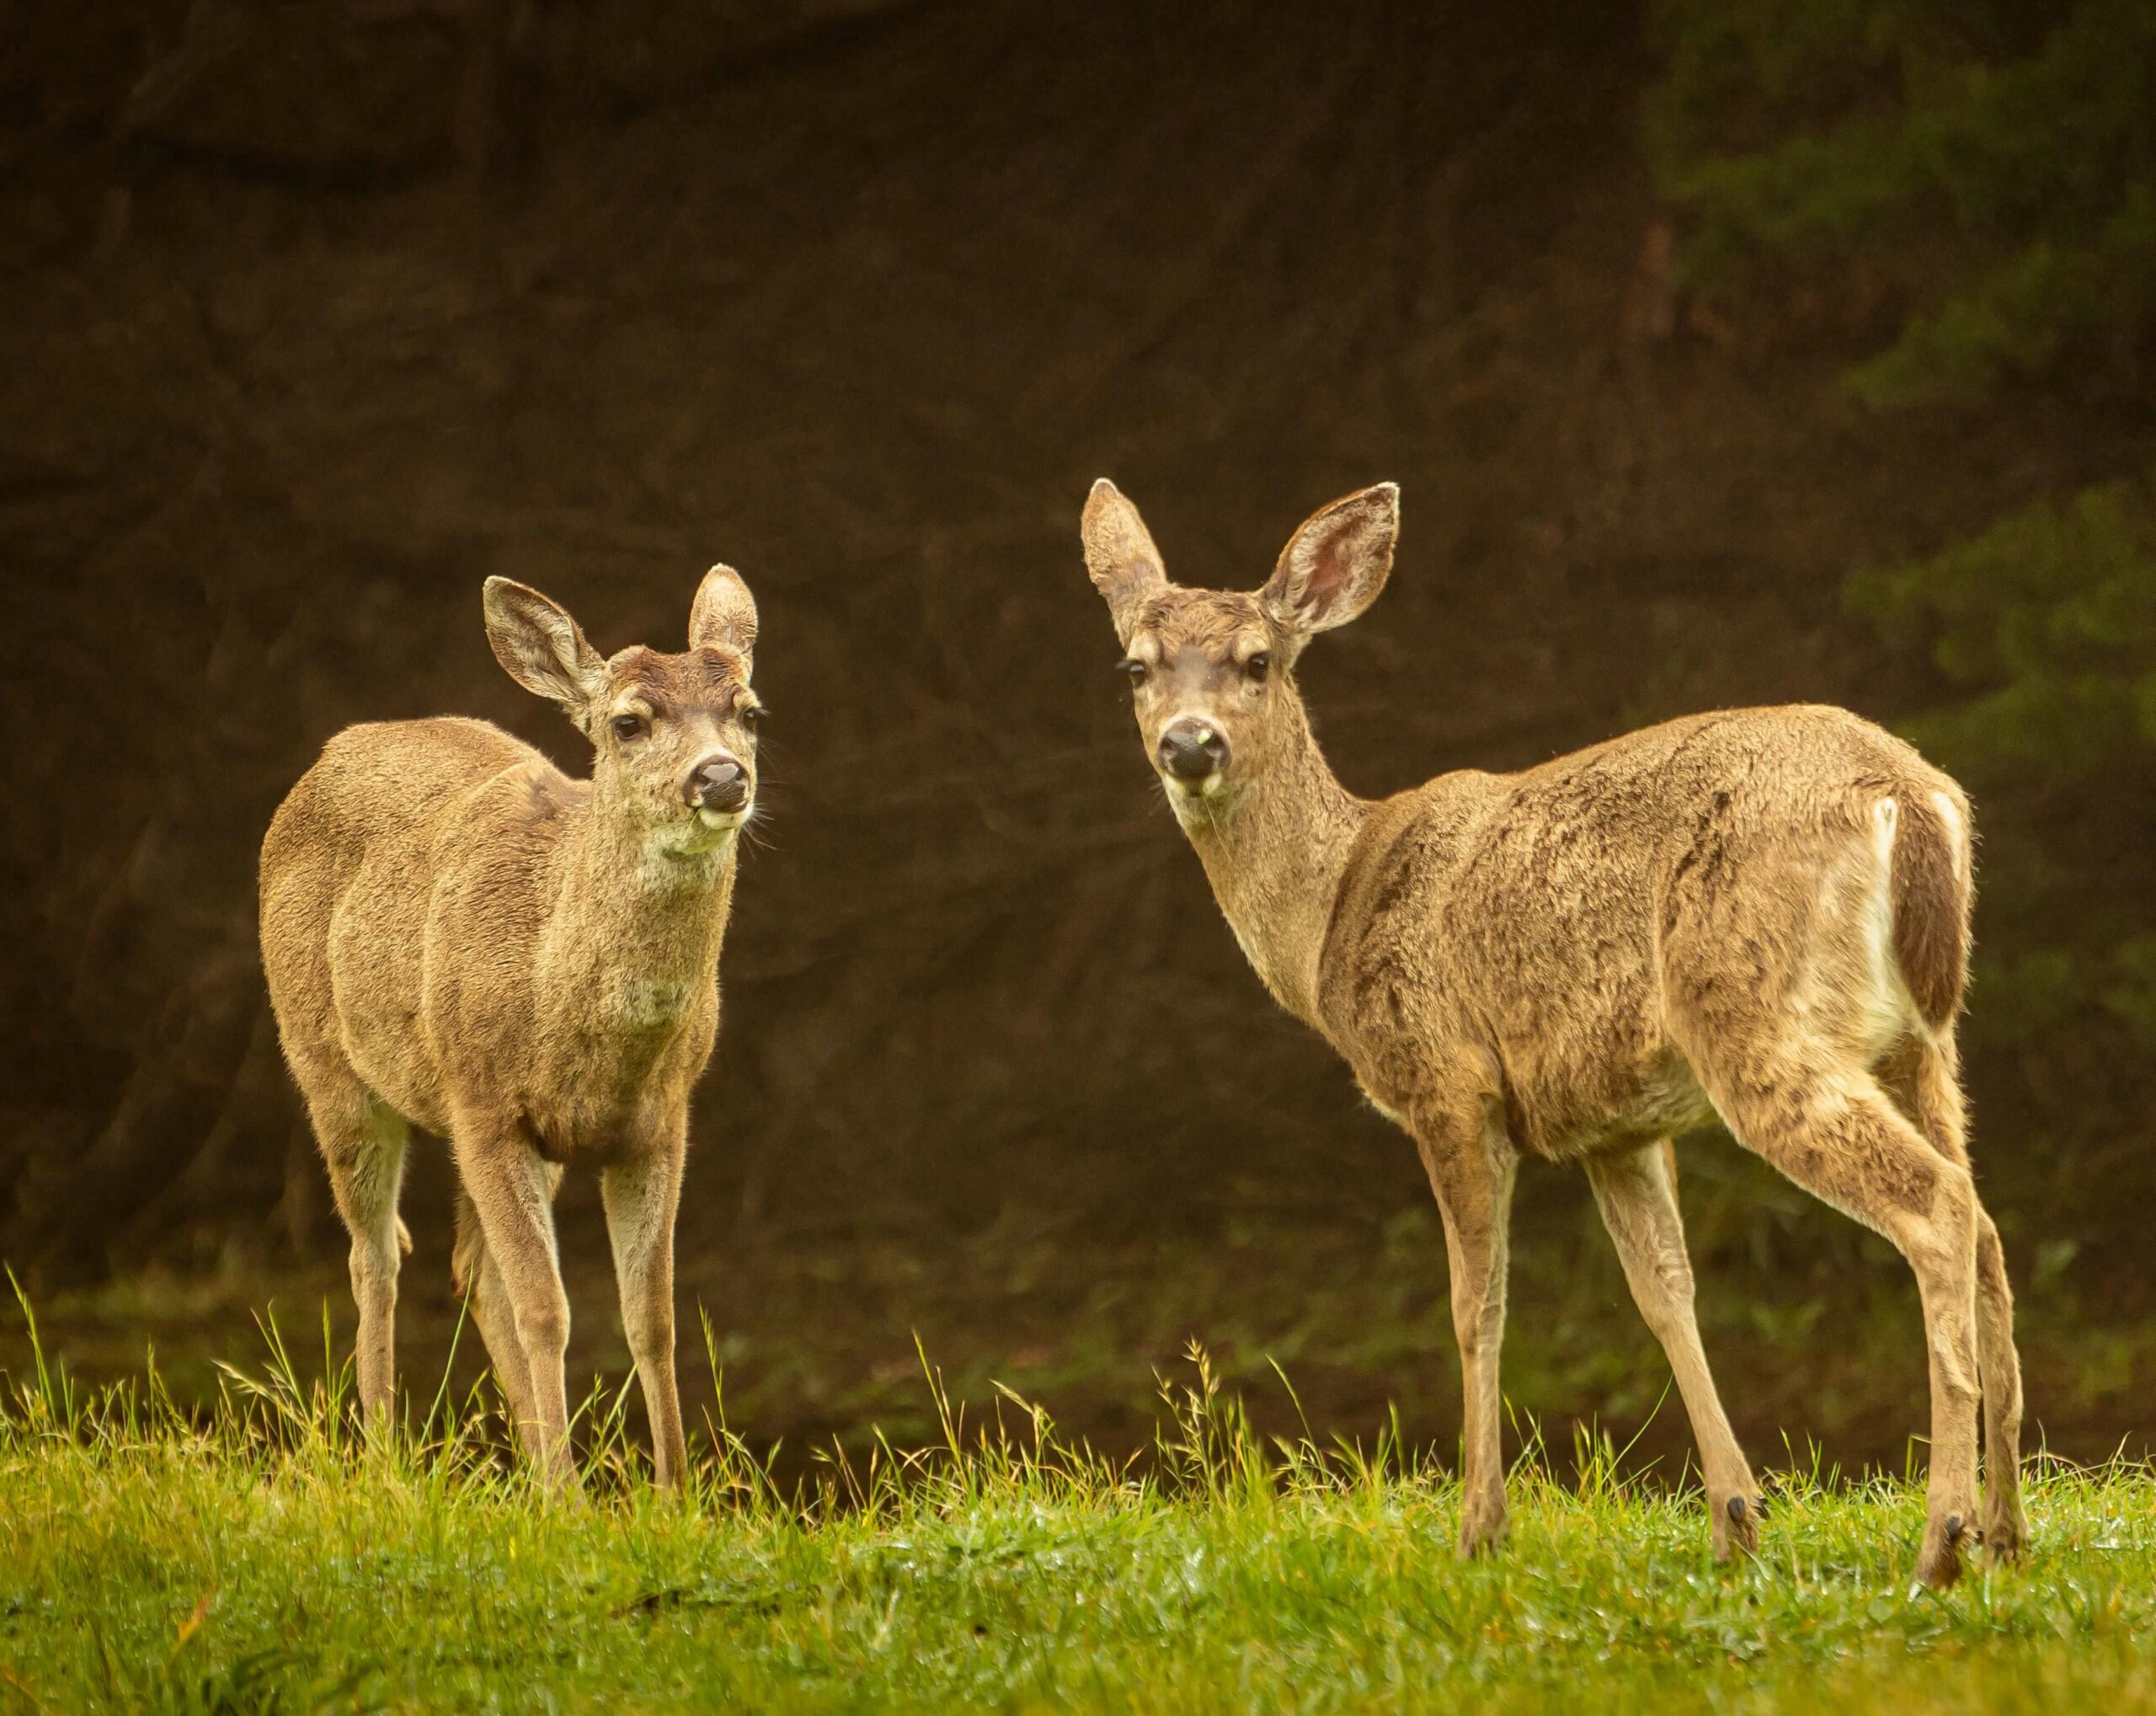 Mare Vista: two wild deer in grass looking at camera